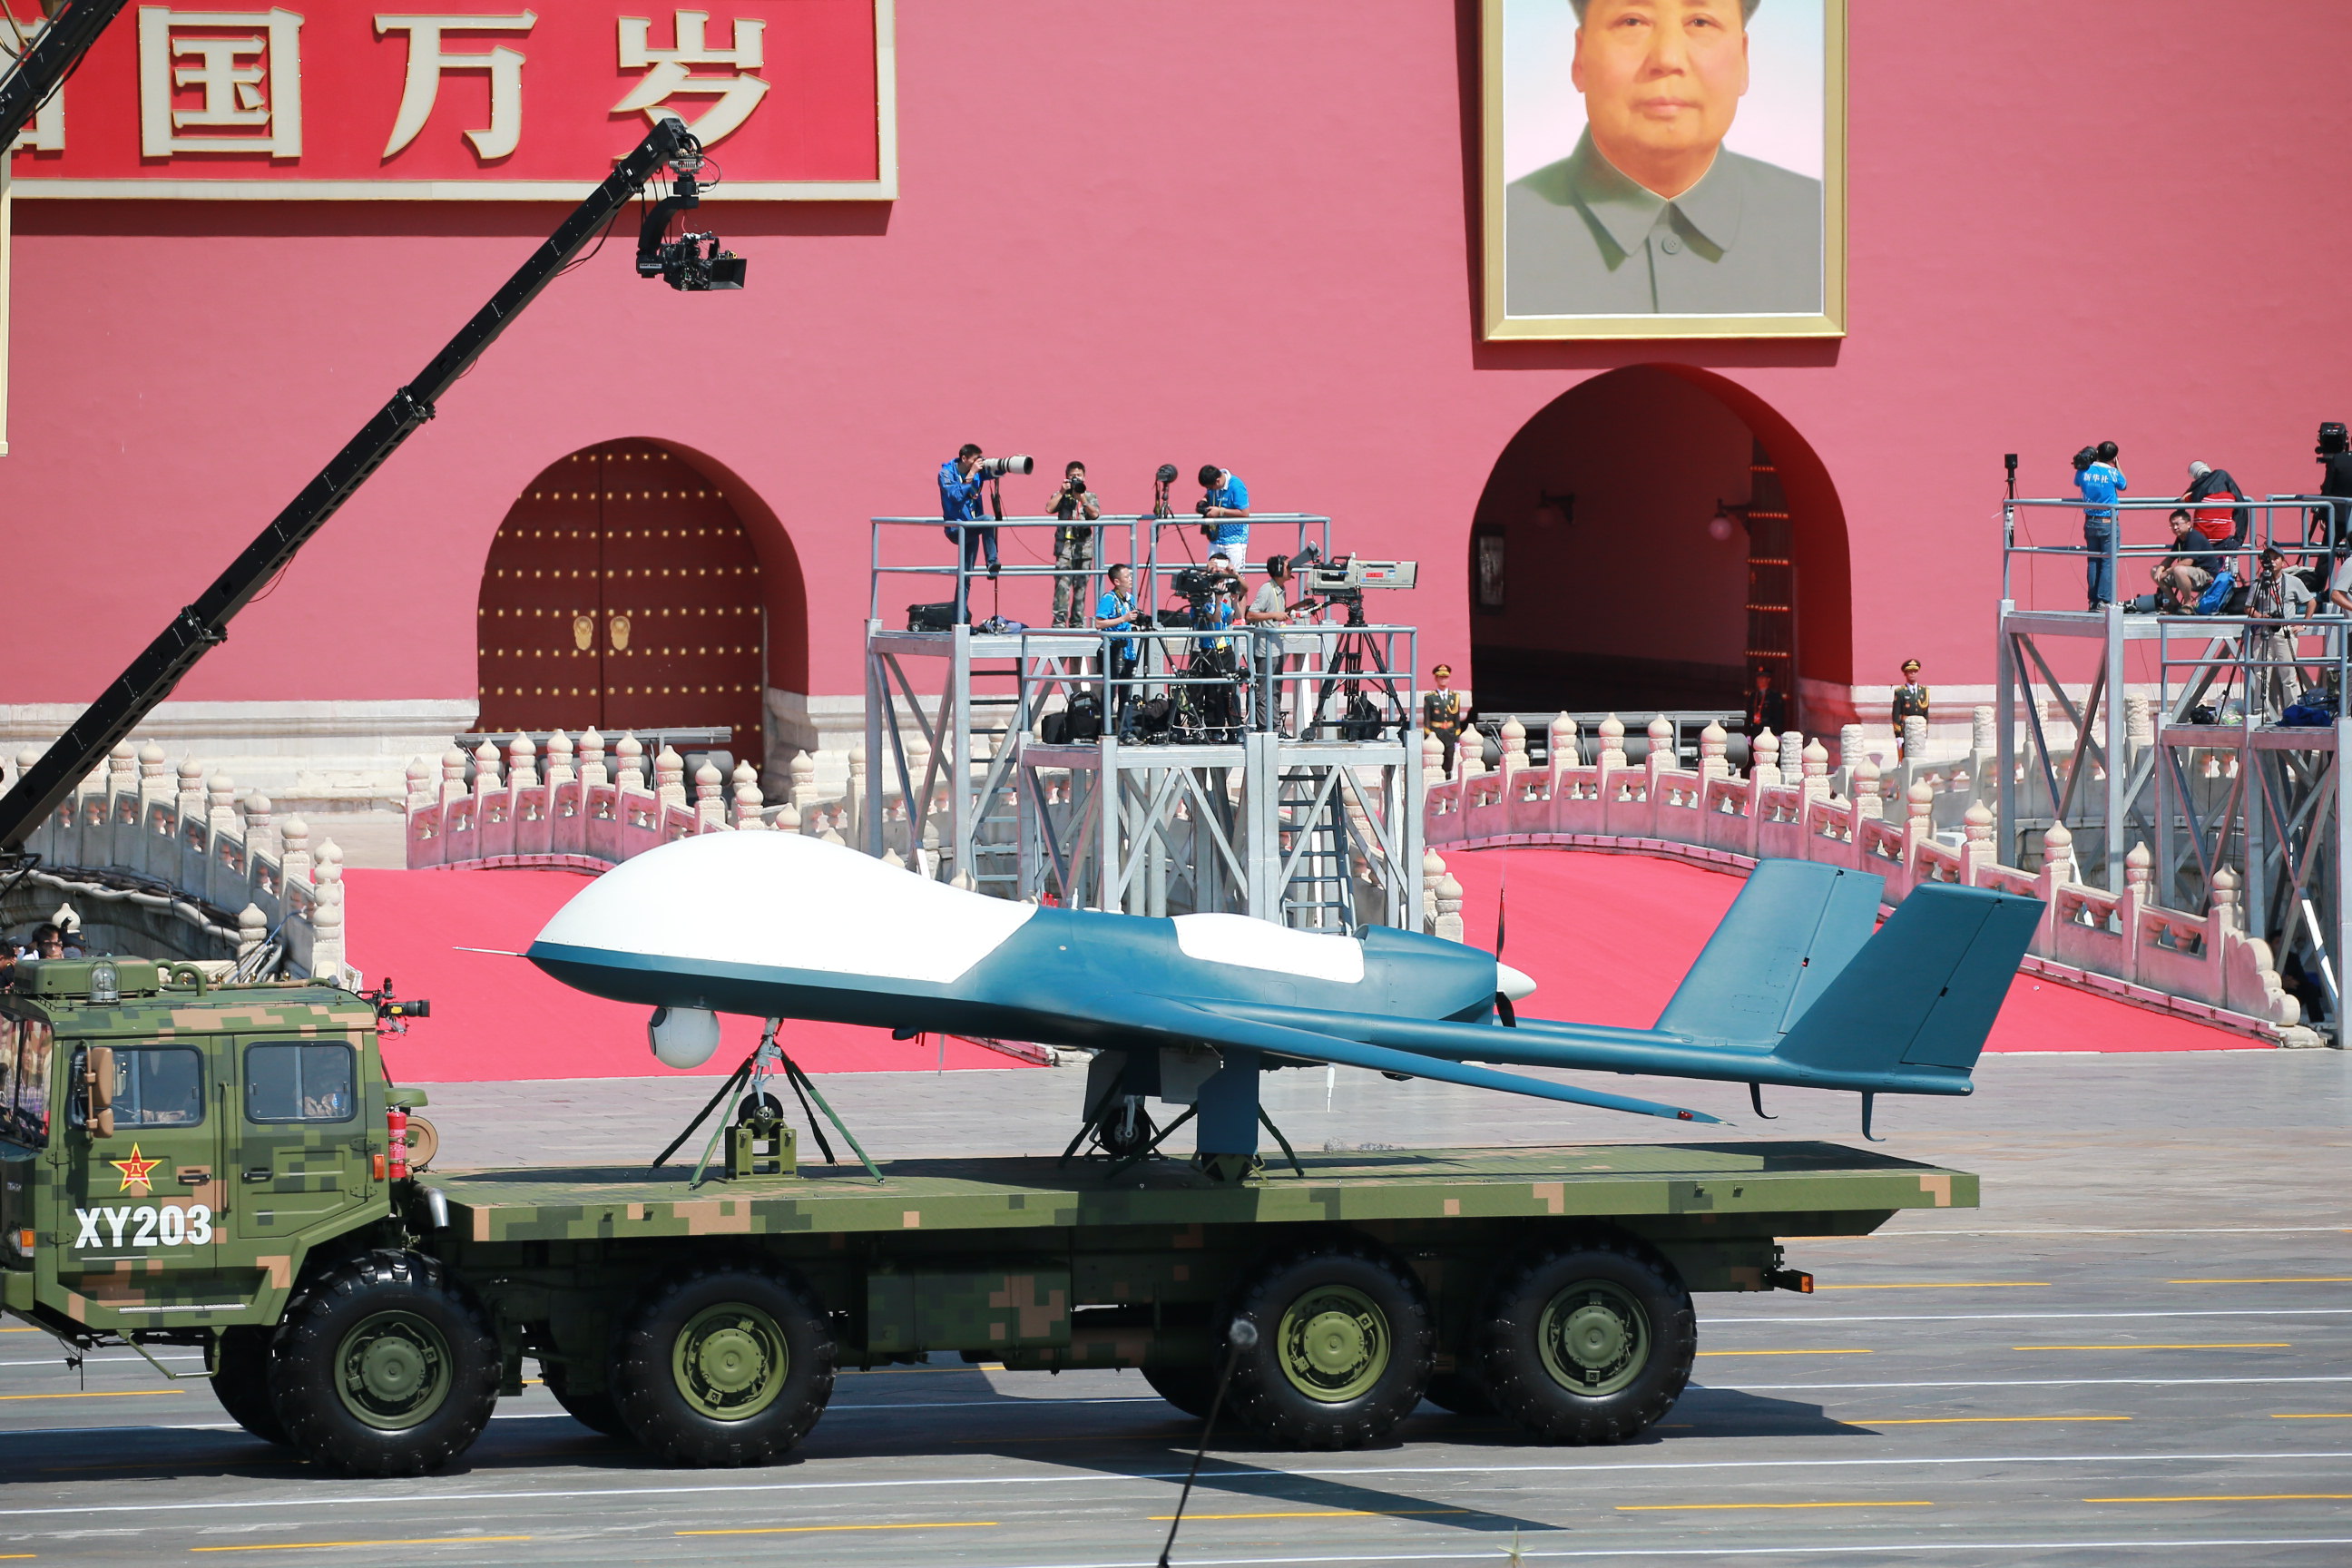 A military vehicle carrying a Wing Loong drone marches past the Tiananmen Rostrum in Beijing, China on Sept. 3 2015. (AP)